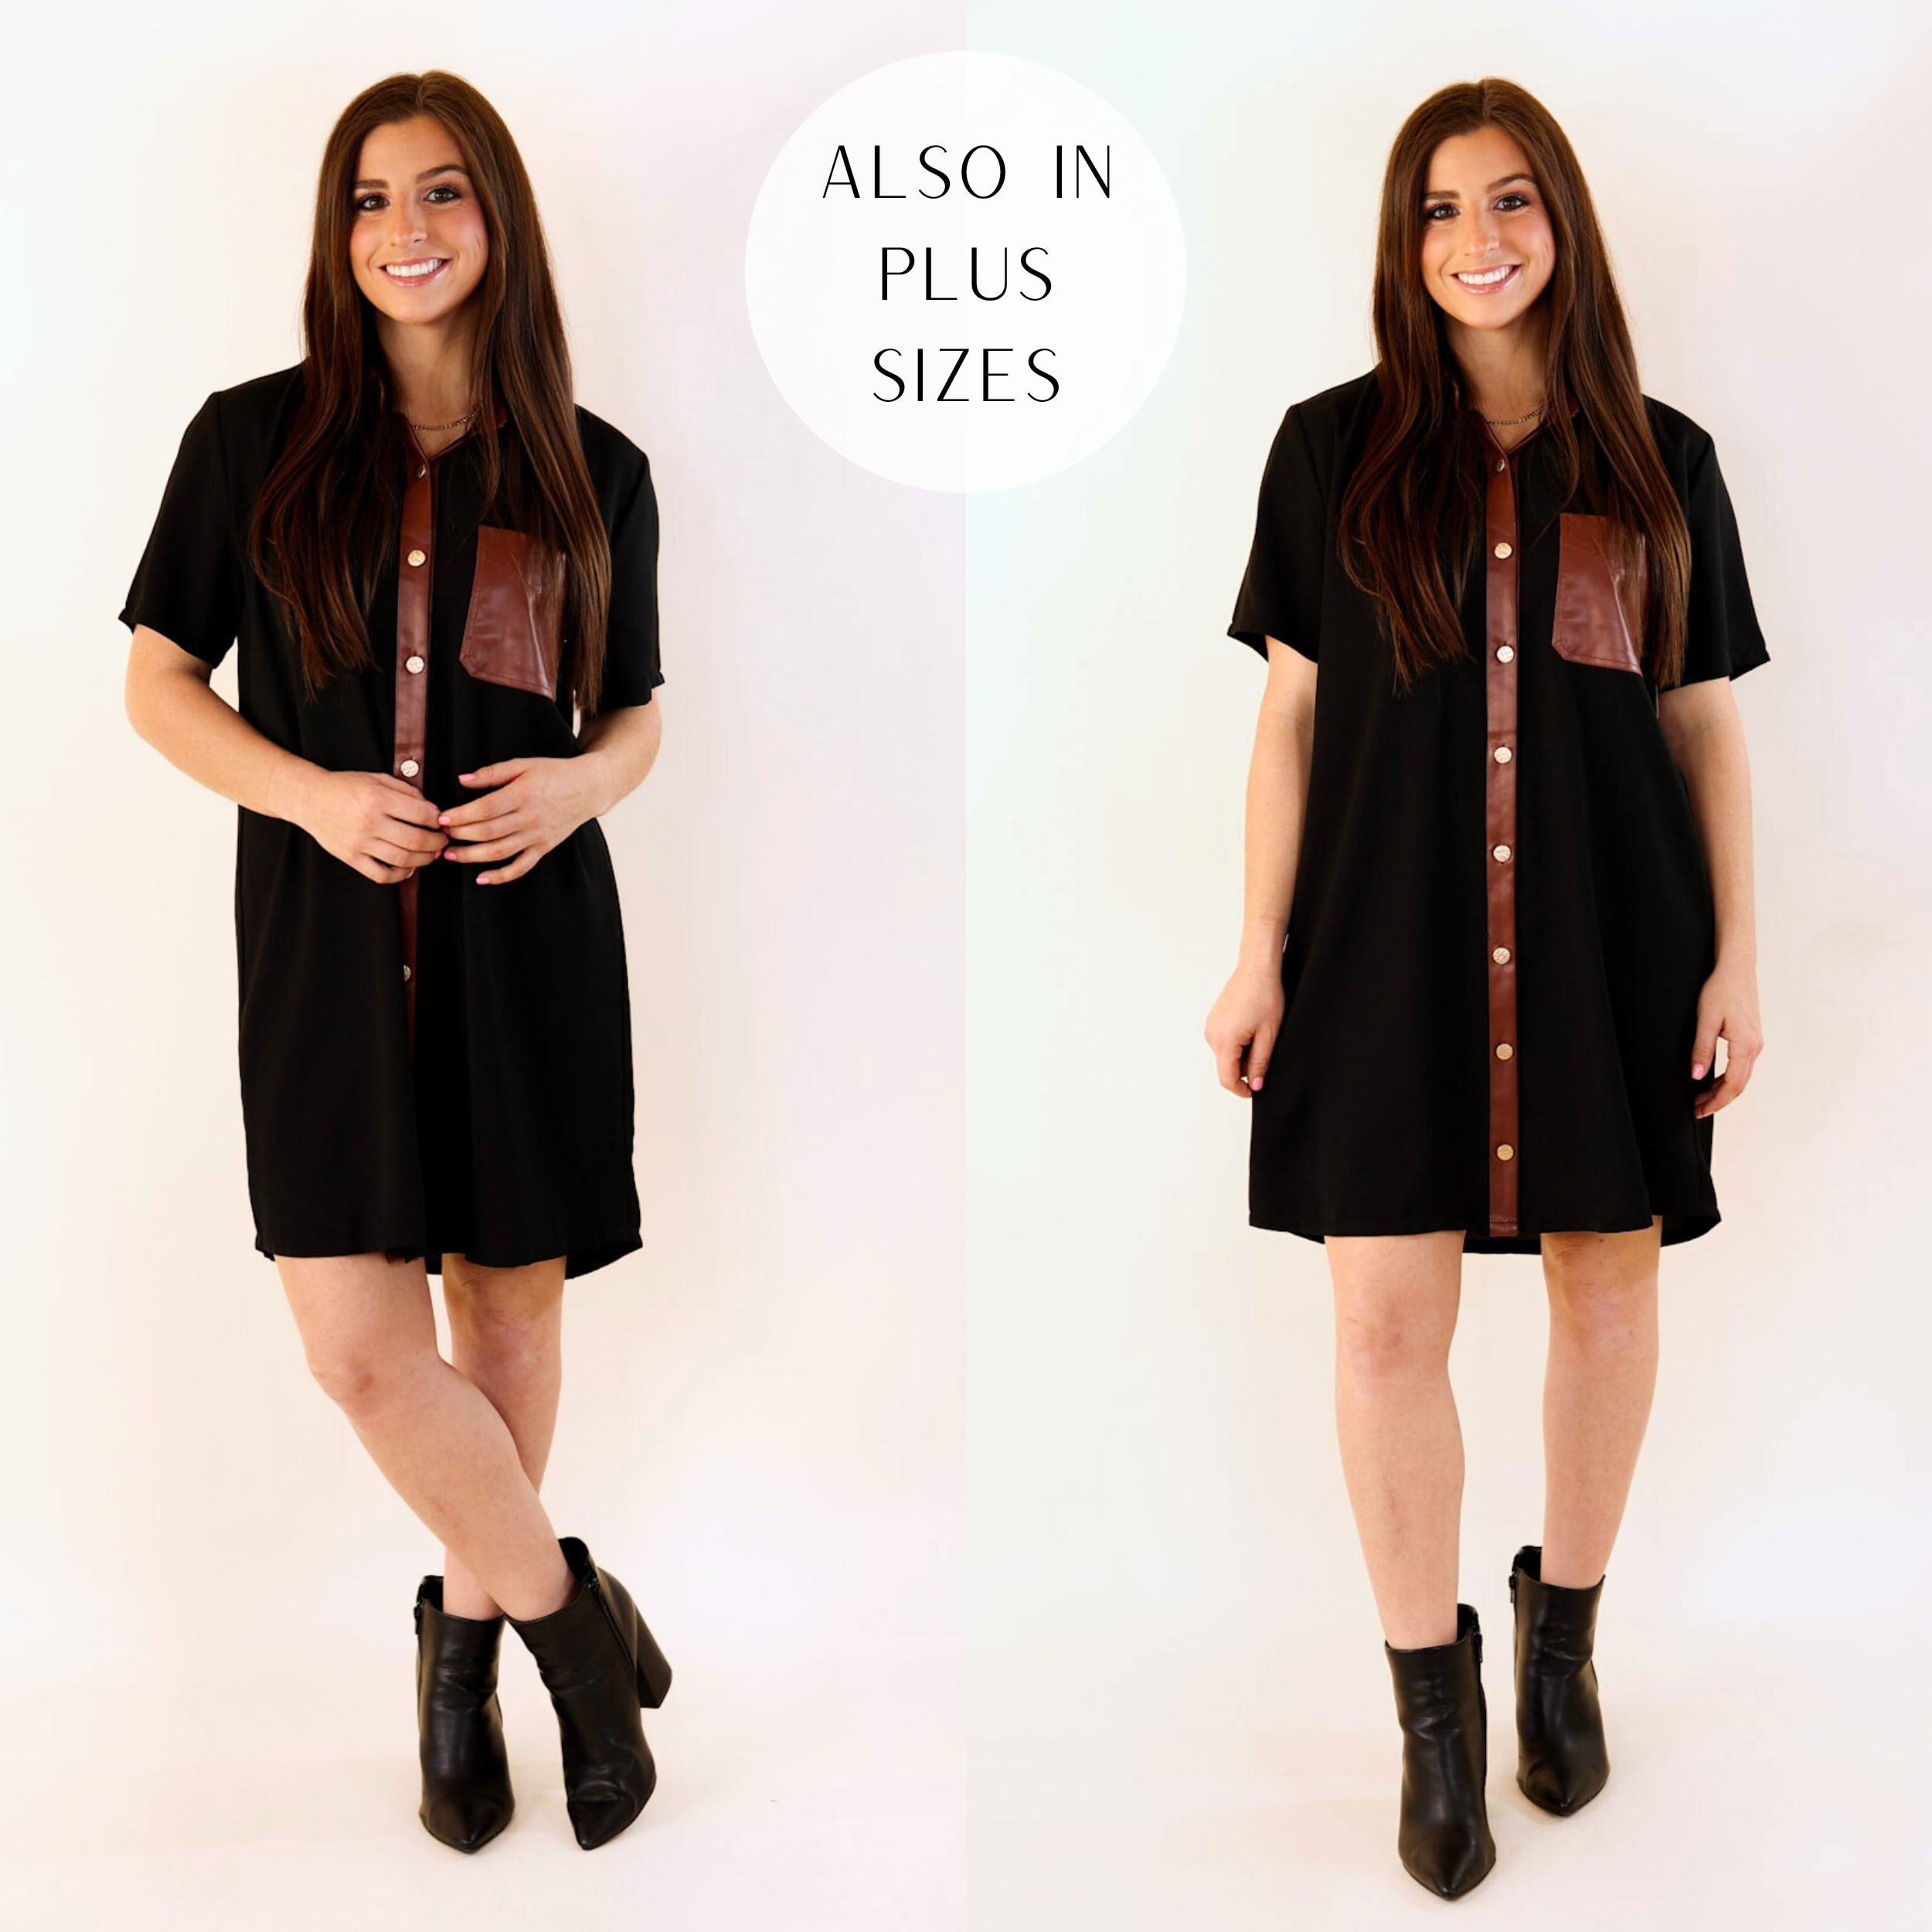 Models are wearing a black short sleeve button up dress that has a faux leather chest pocket. front trim, and collar. Both models have it paired with gold jewelry and heeled mules.